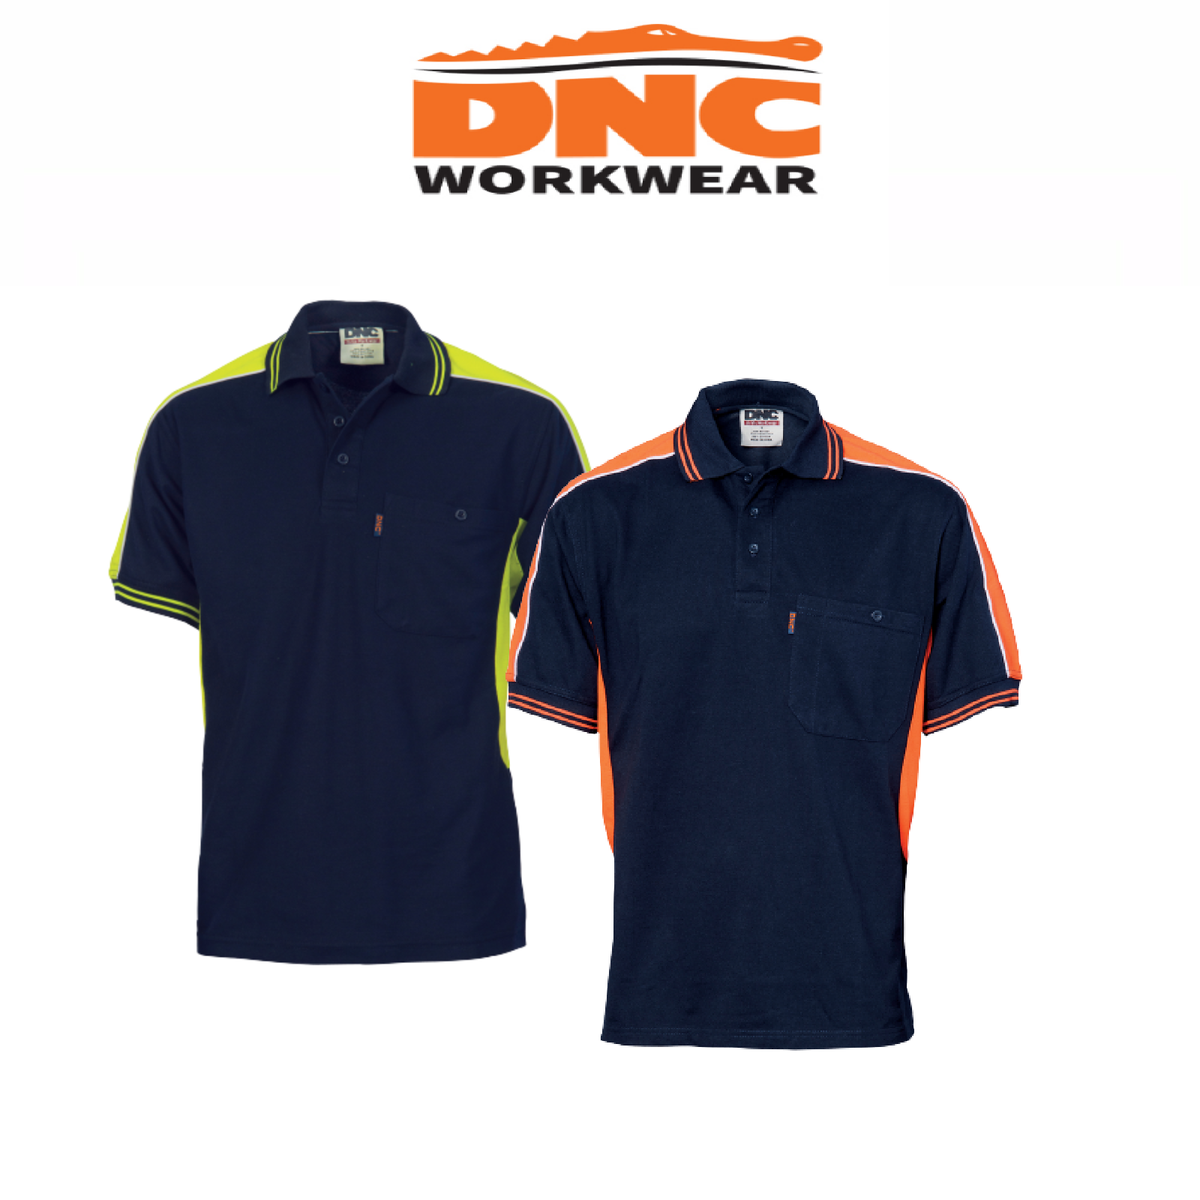 DNC Workwear Mens Polyester Cotton Panel Polo Shirt - Short Sleeve Casual 5214